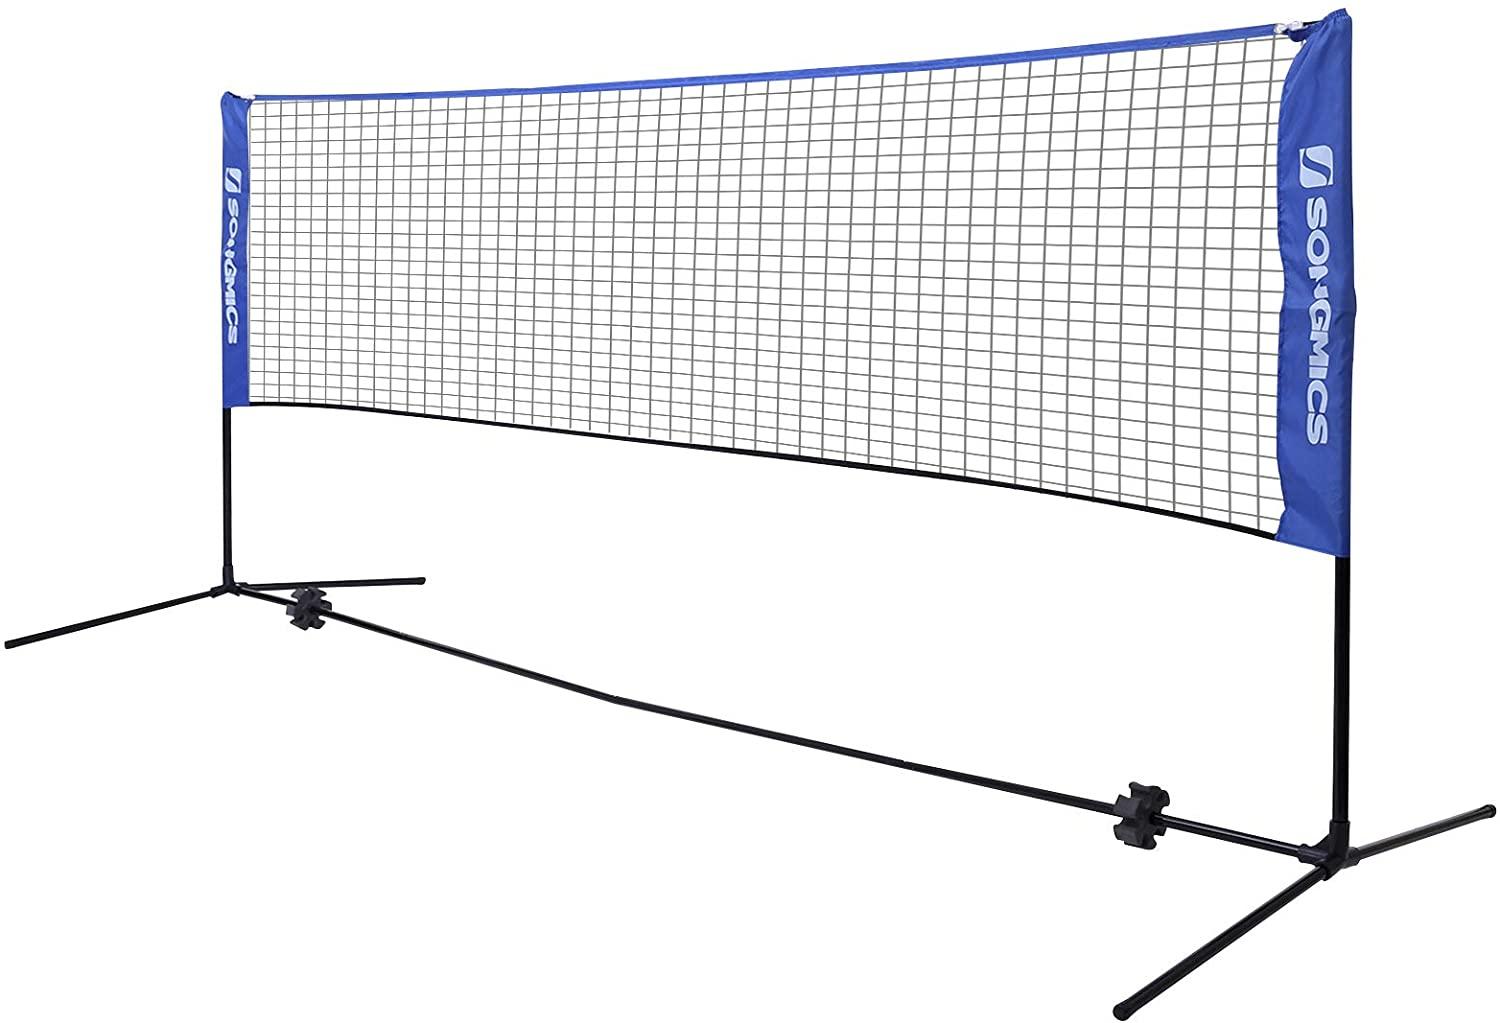 16.5ft Portable Indoor Outdoor Badminton Net Set for $23.99 Shipped